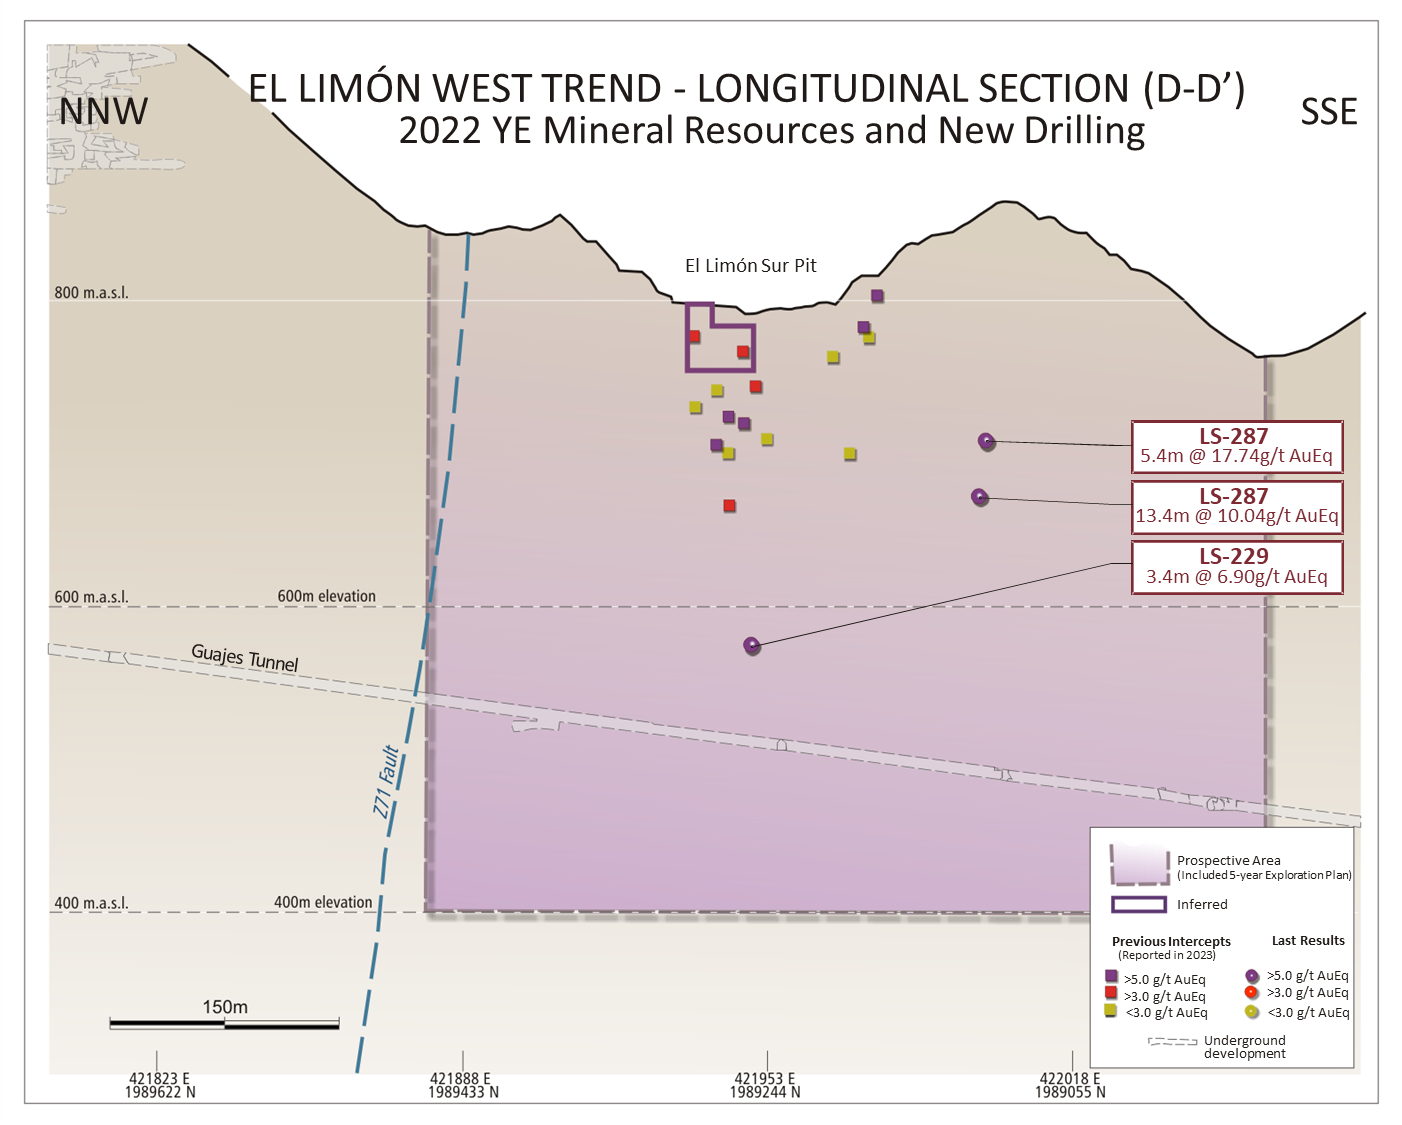 Three new drill holes encountered mineralization along the El Limón West Trend, expanding the exploration potential for another new mining front within ELG Underground